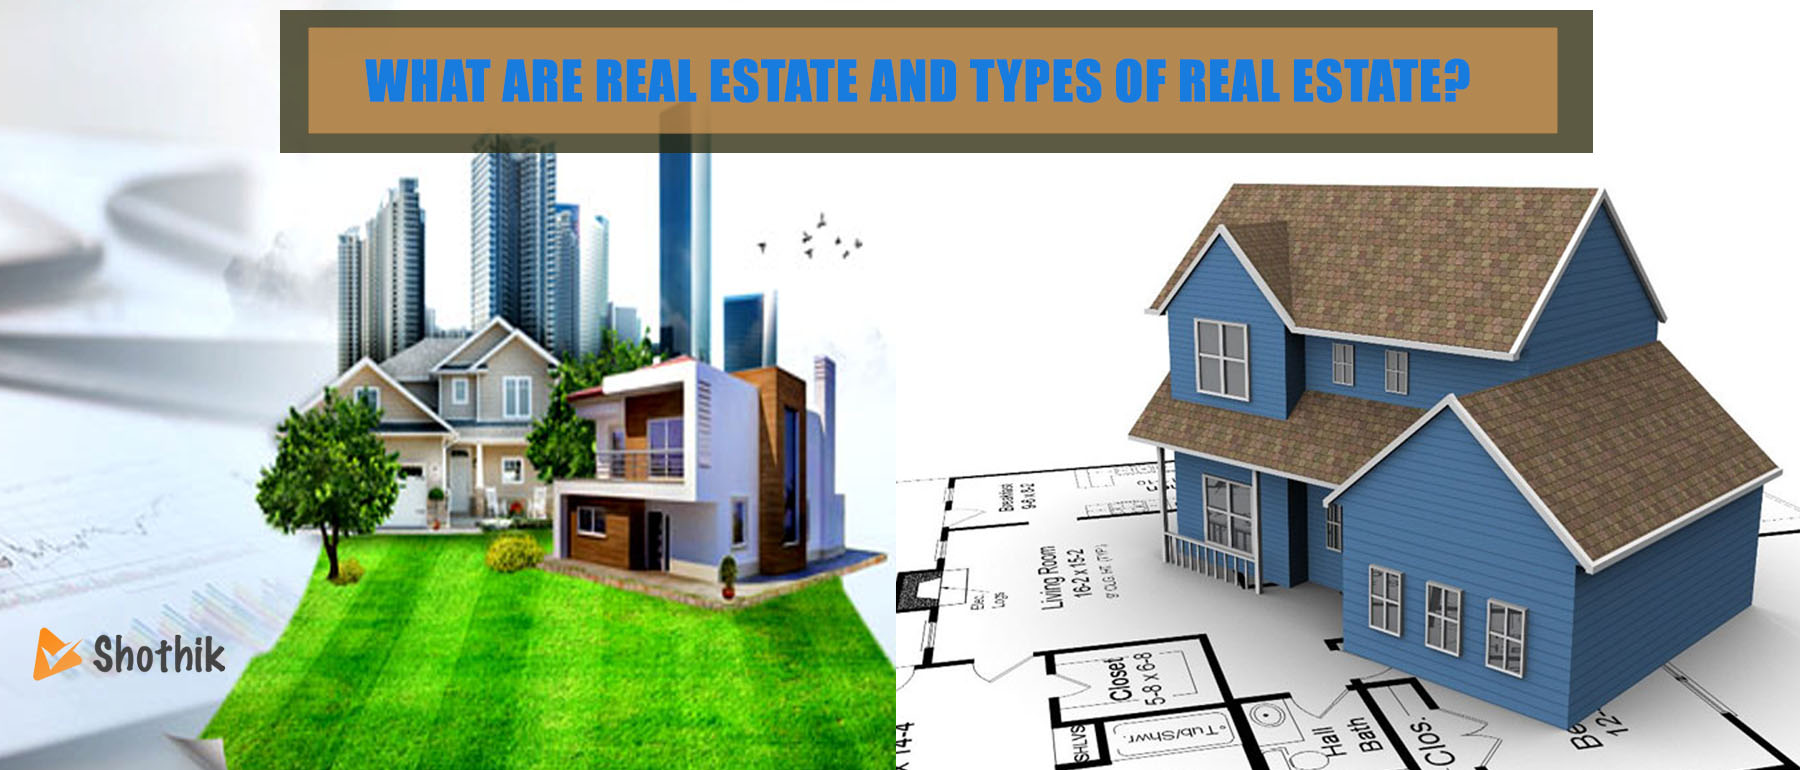 What are Real estate and types of real estate